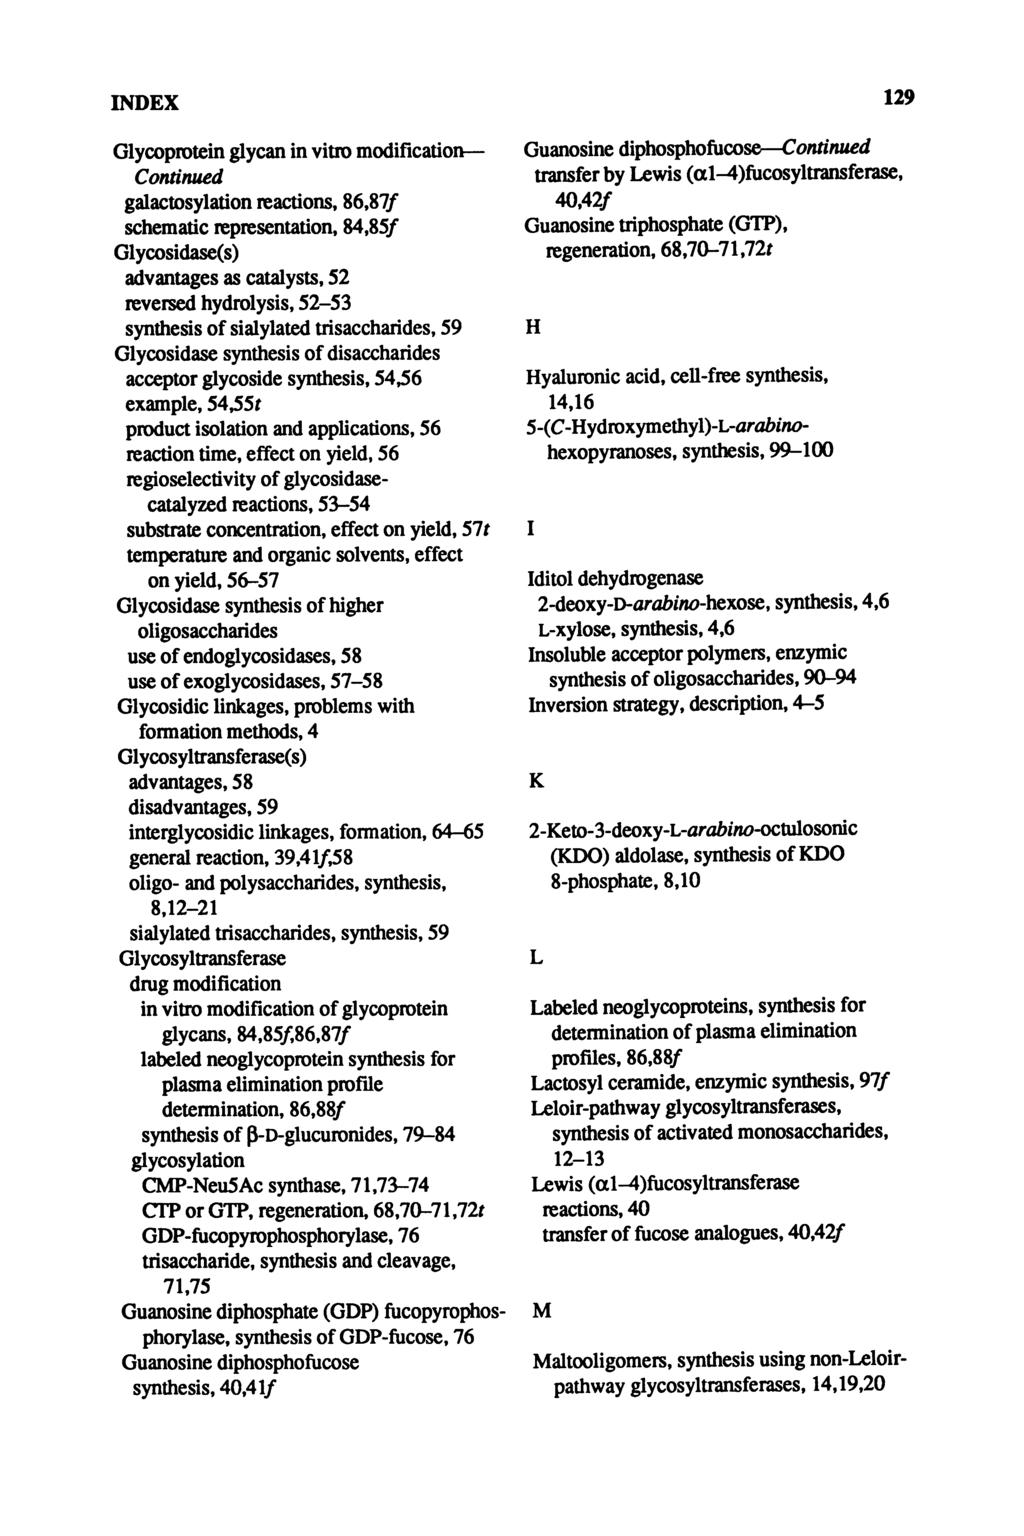 INDEX 129 Glycoprotein glycan in vitro modification Continued galactosylation reactions, 86,87/ schematic representation, 84,85/ Glycosidase(s) advantages as catalysts, 52 reversed hydrolysis, 52-53